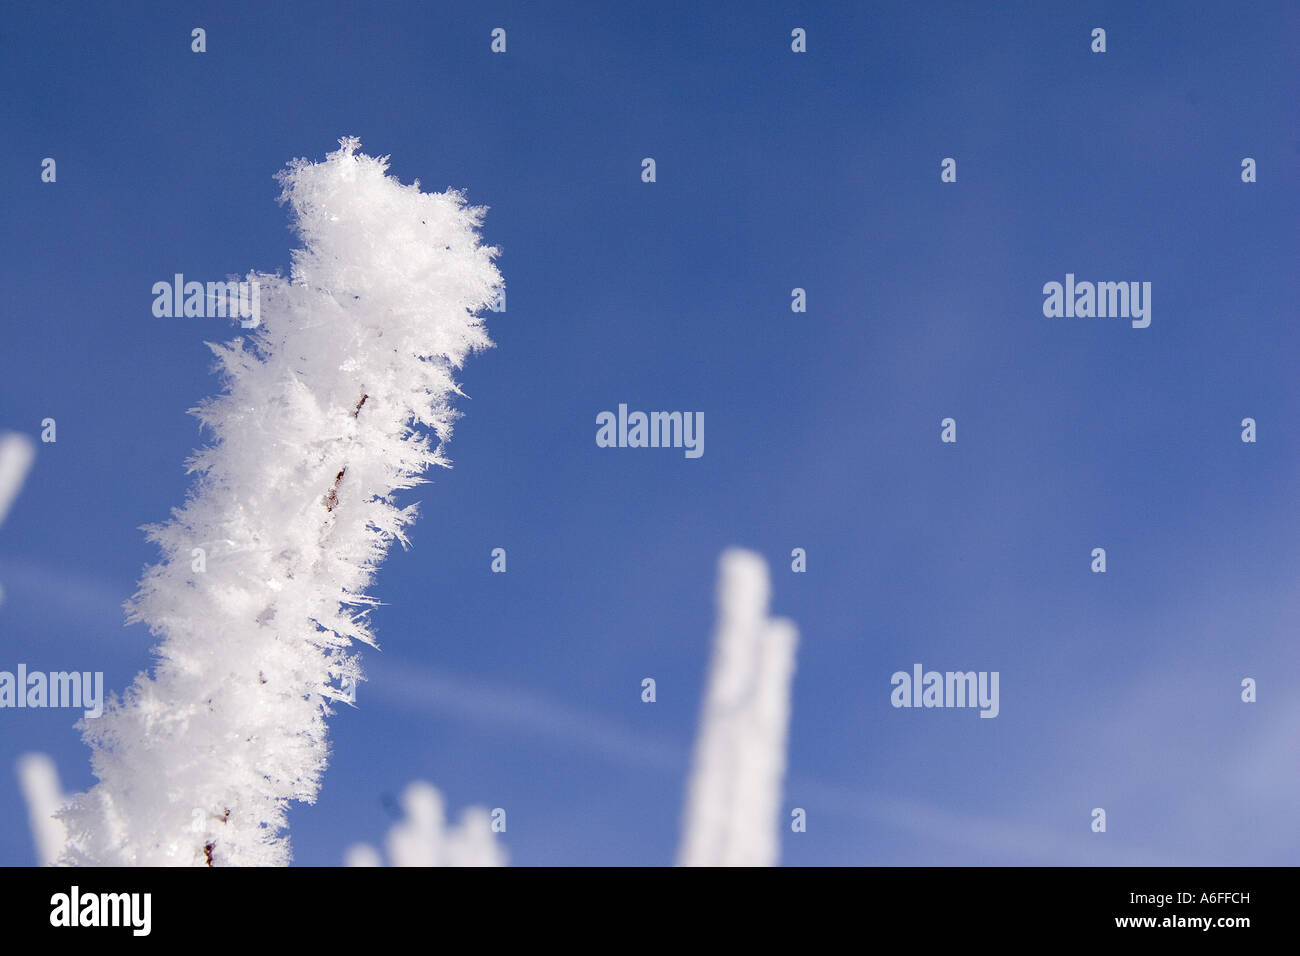 A closeup of willow branches covered with frost against a blue sky in the Martis Valley near Truckee California Stock Photo